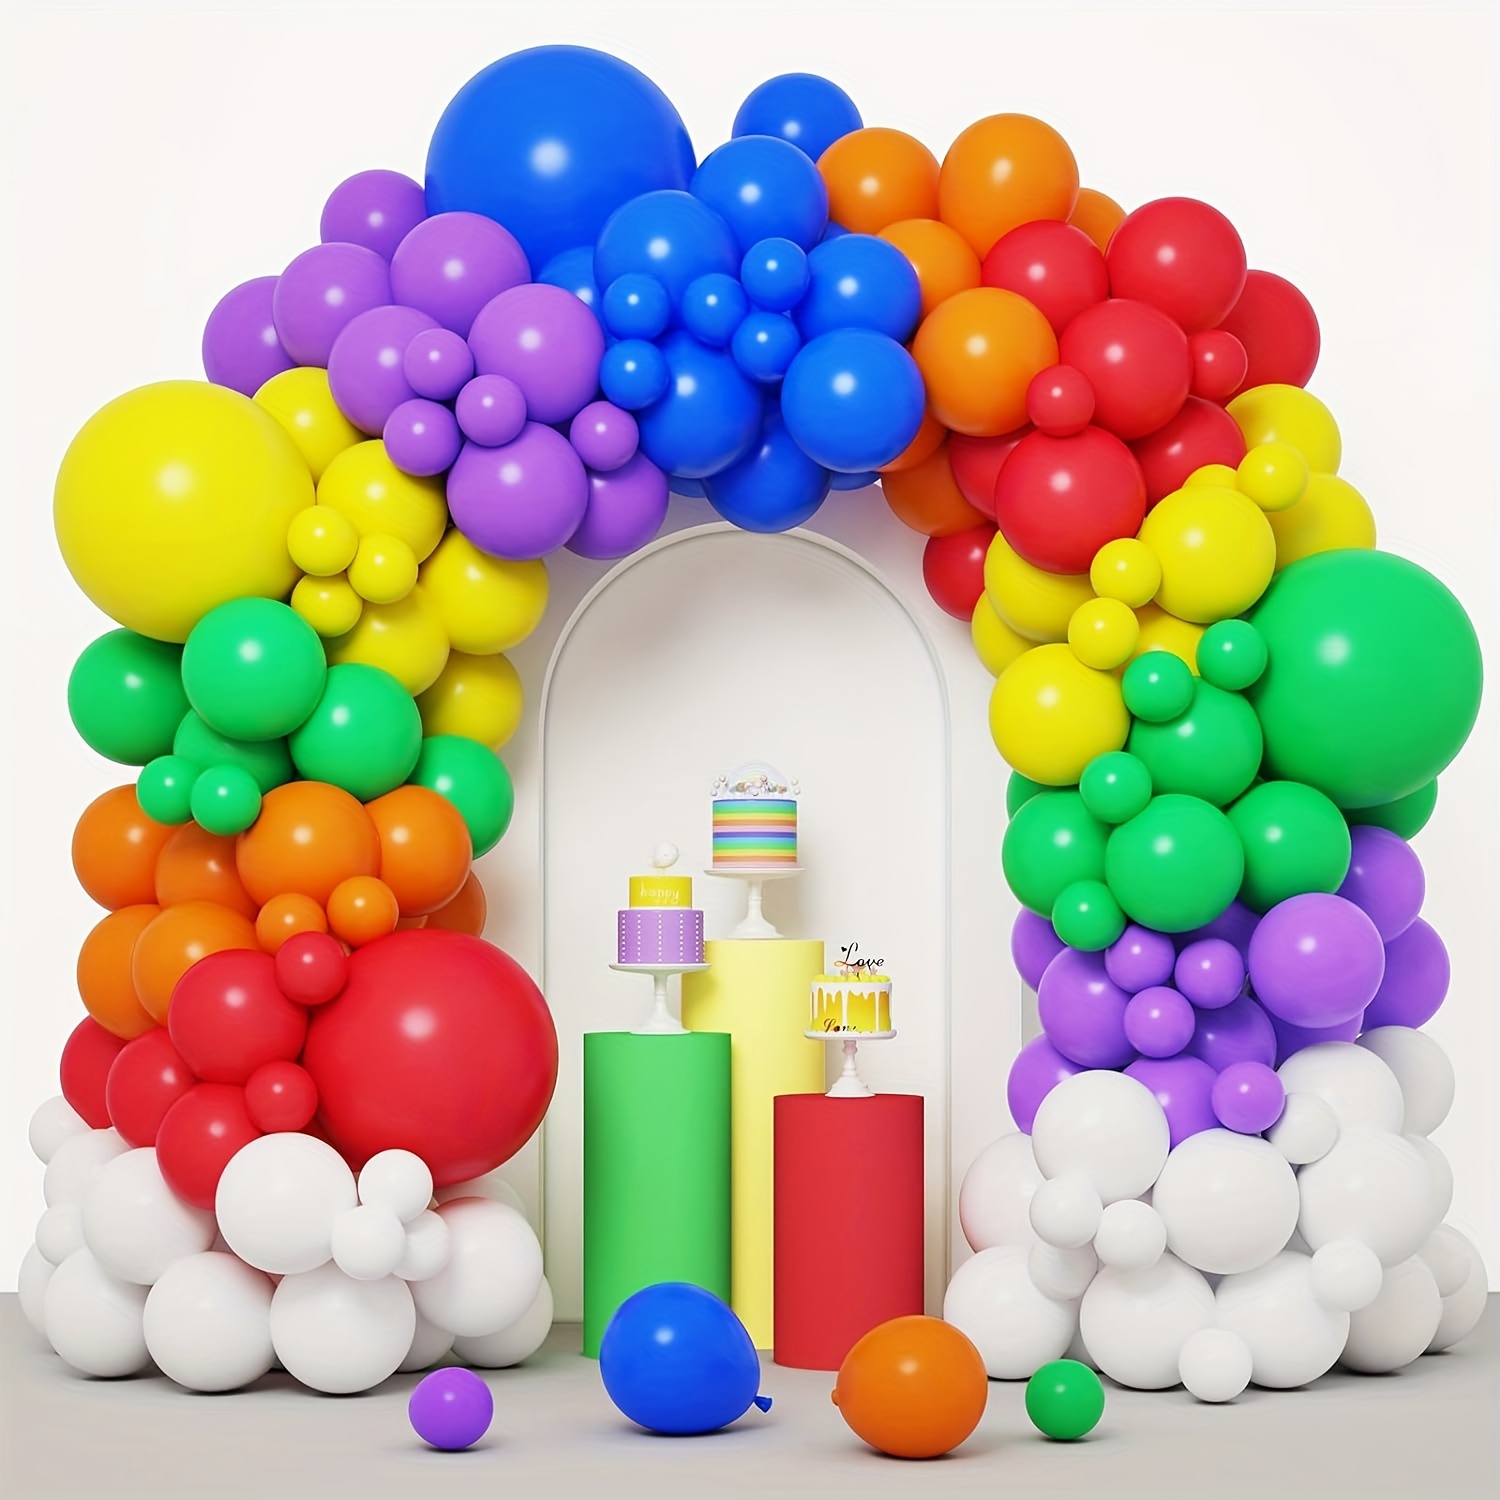 House of Party Rainbow Balloon Arch Kit -135 Pcs Colorful Pride Balloons Included for Balloon Garland, Arch, and Fiesta Decorations - Perfect for